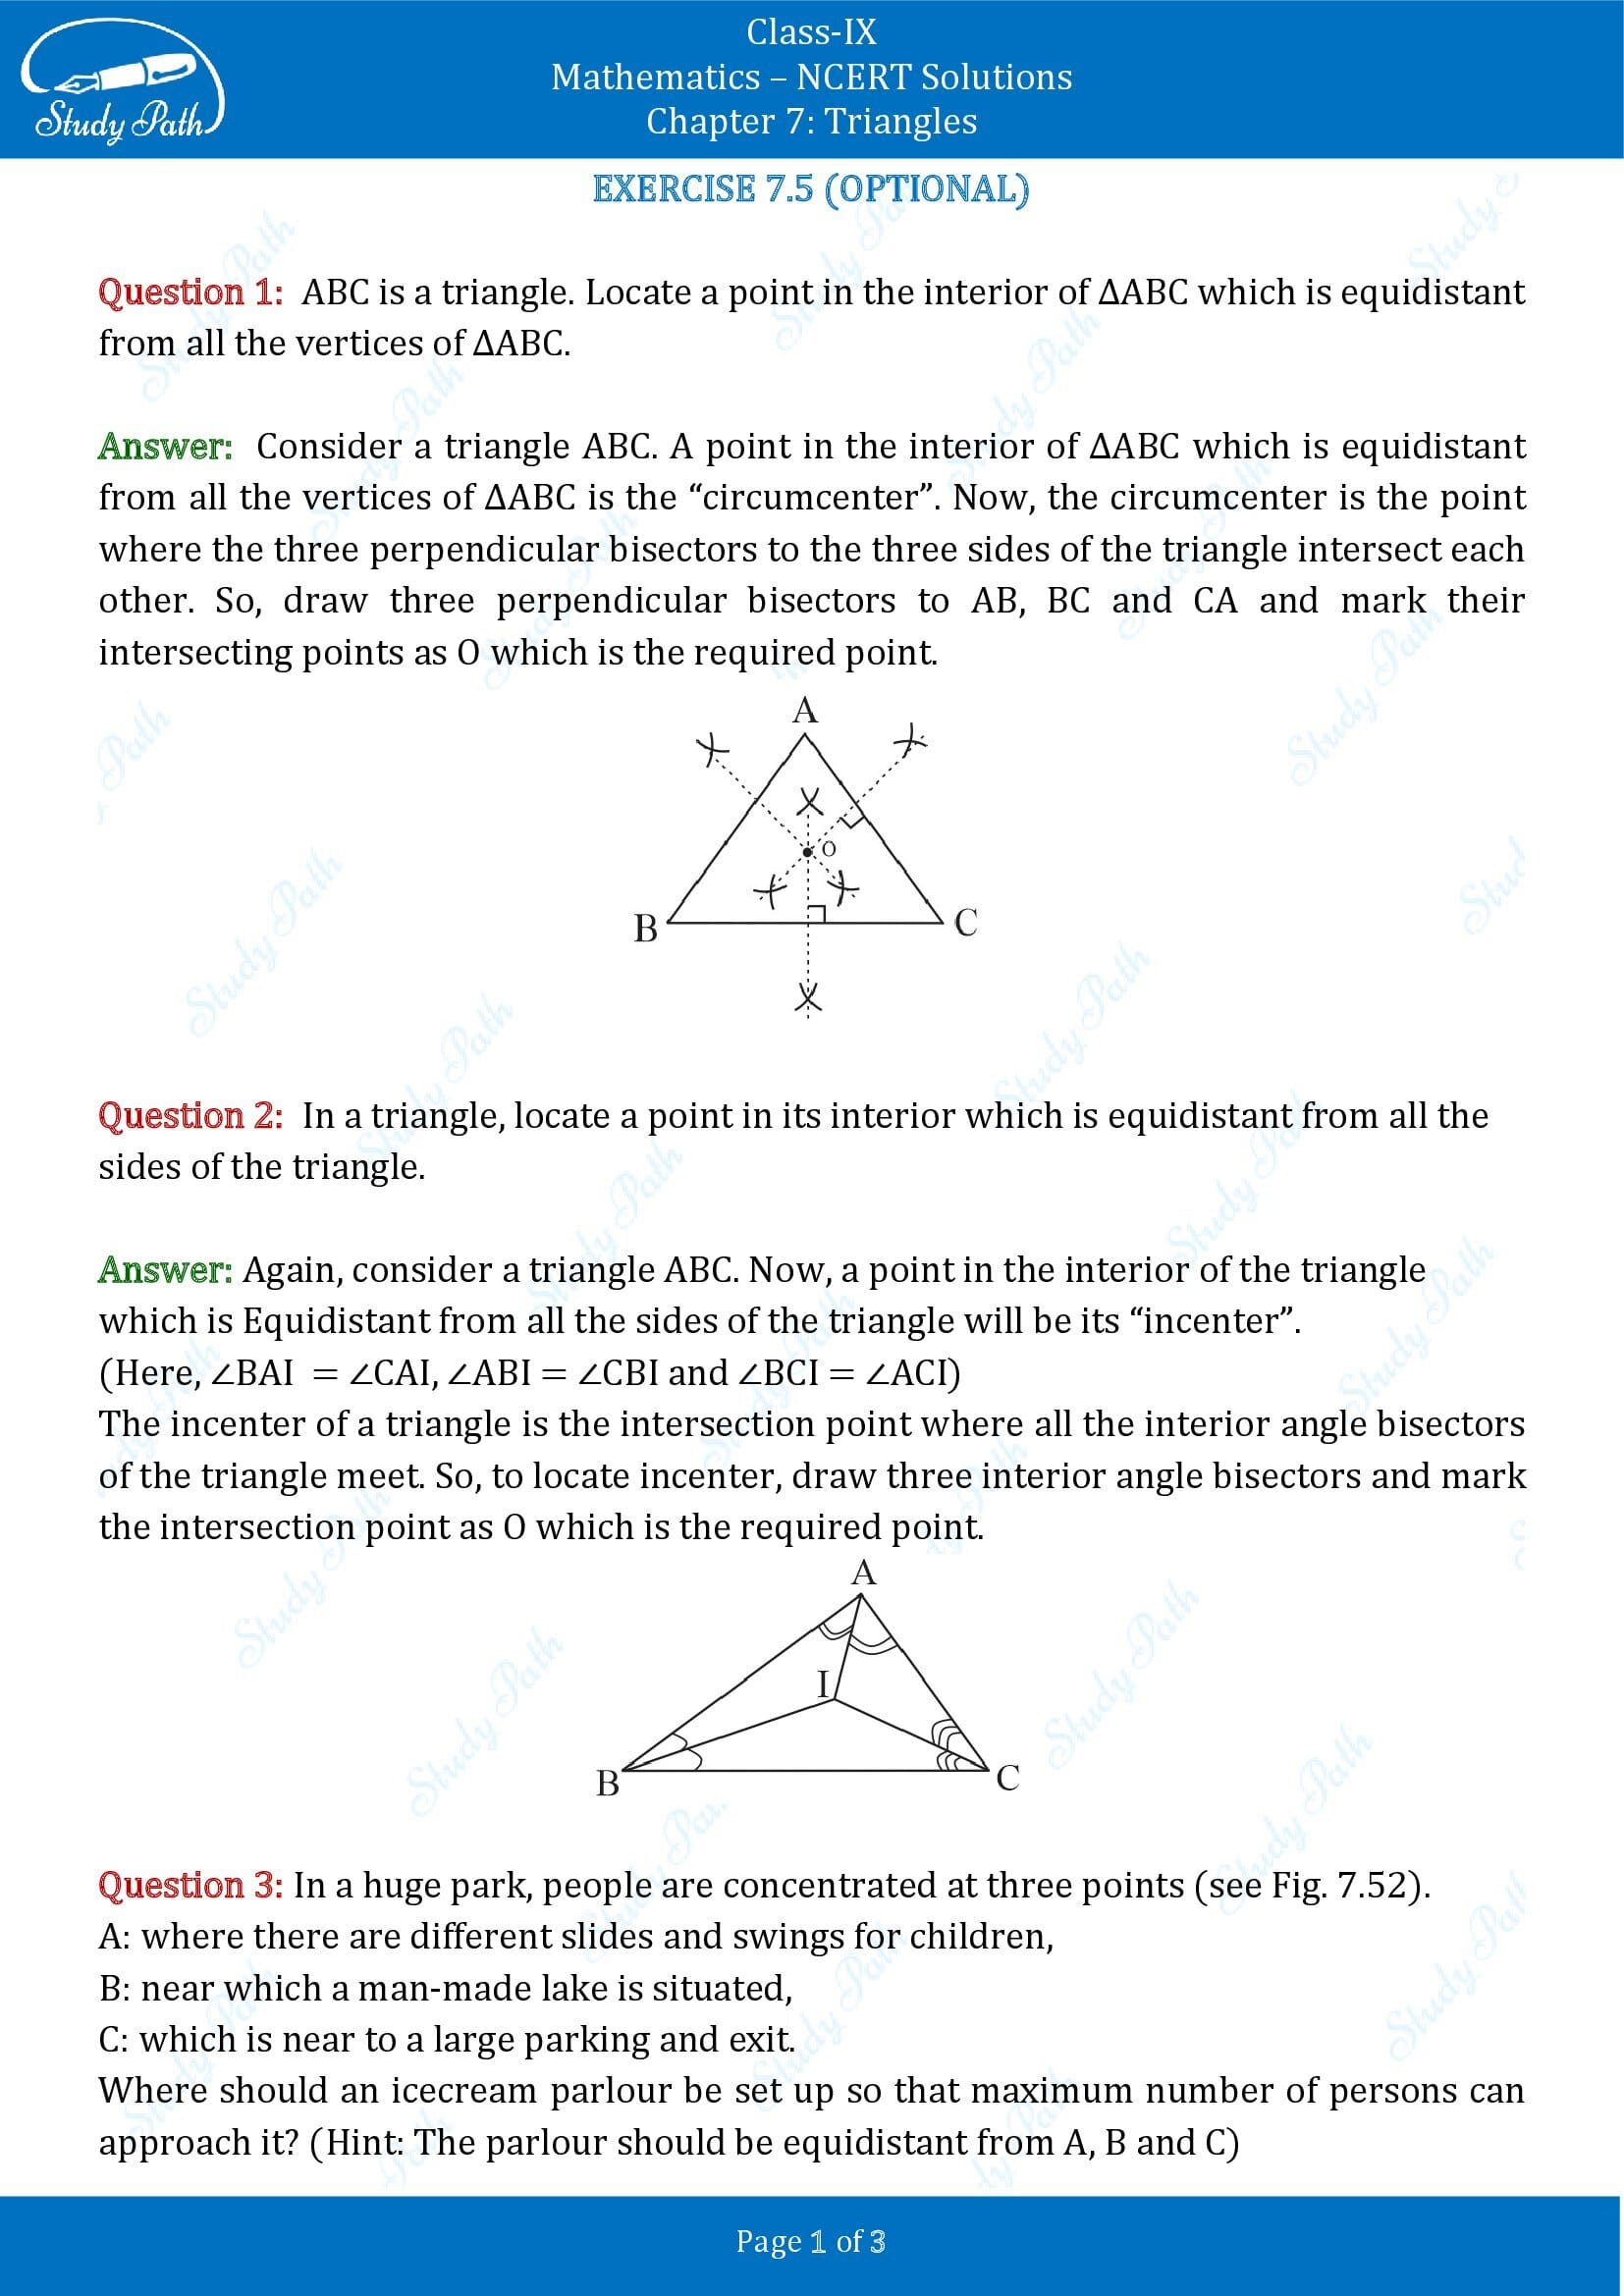 NCERT Solutions for Class 9 Maths Chapter 7 Triangles Exercise 7.5 00001